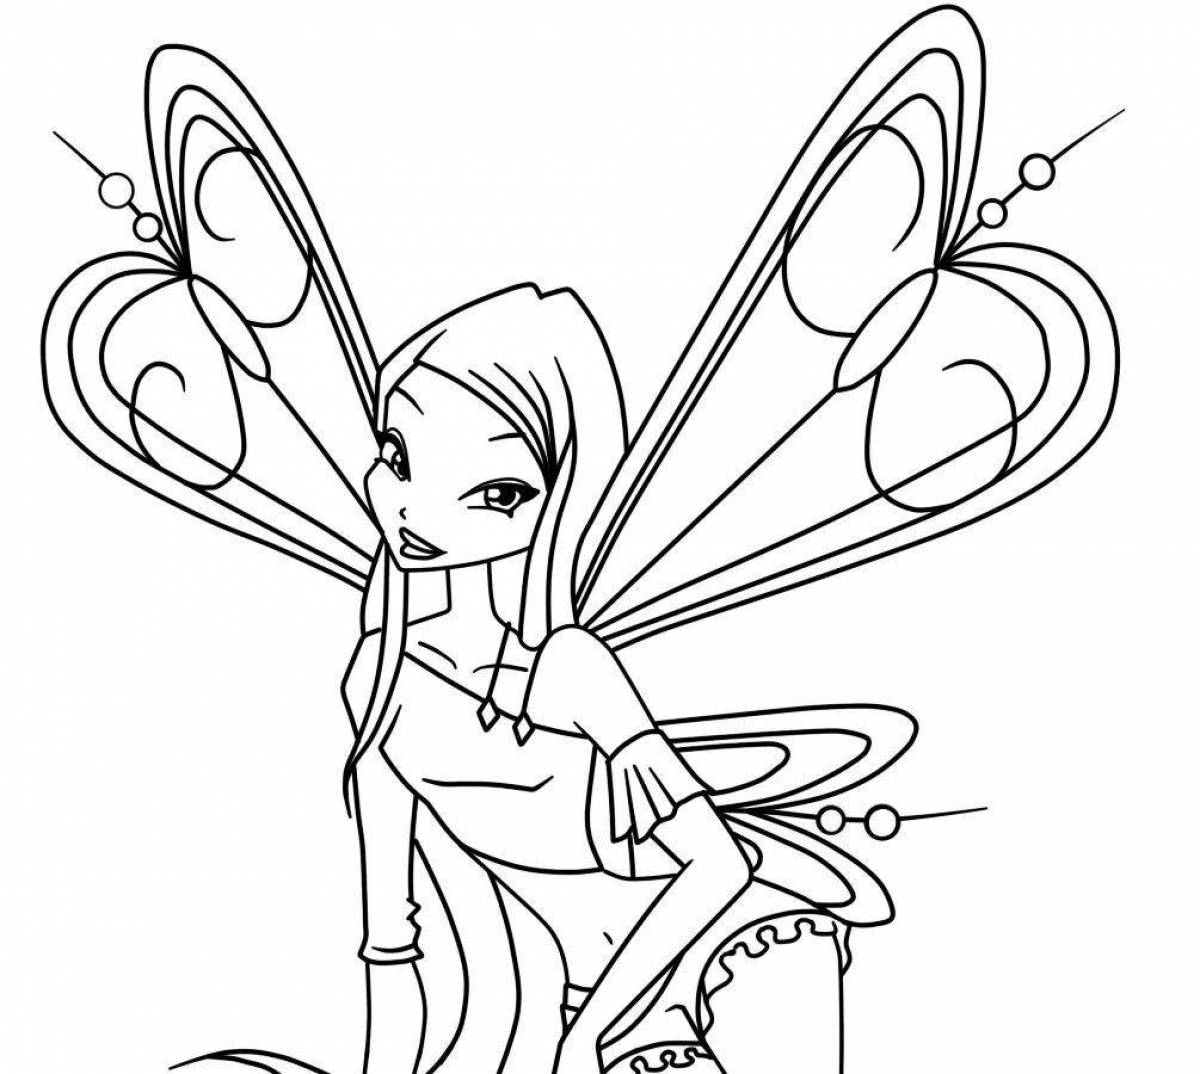 Adorable winx coloring pages for girls fairies